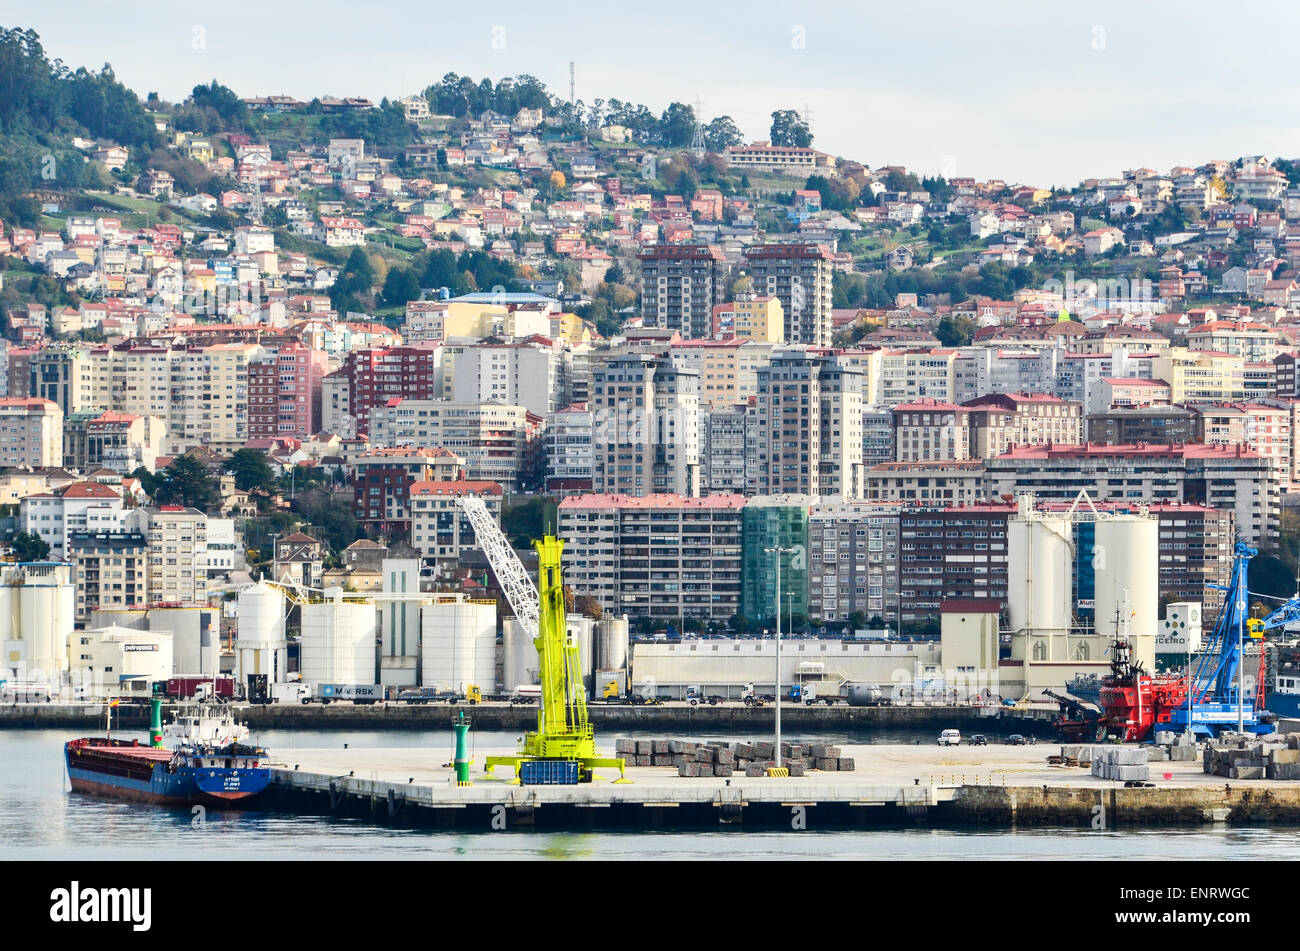 Flats and buildings of the city of Vigo, Spain, behind the port Stock Photo